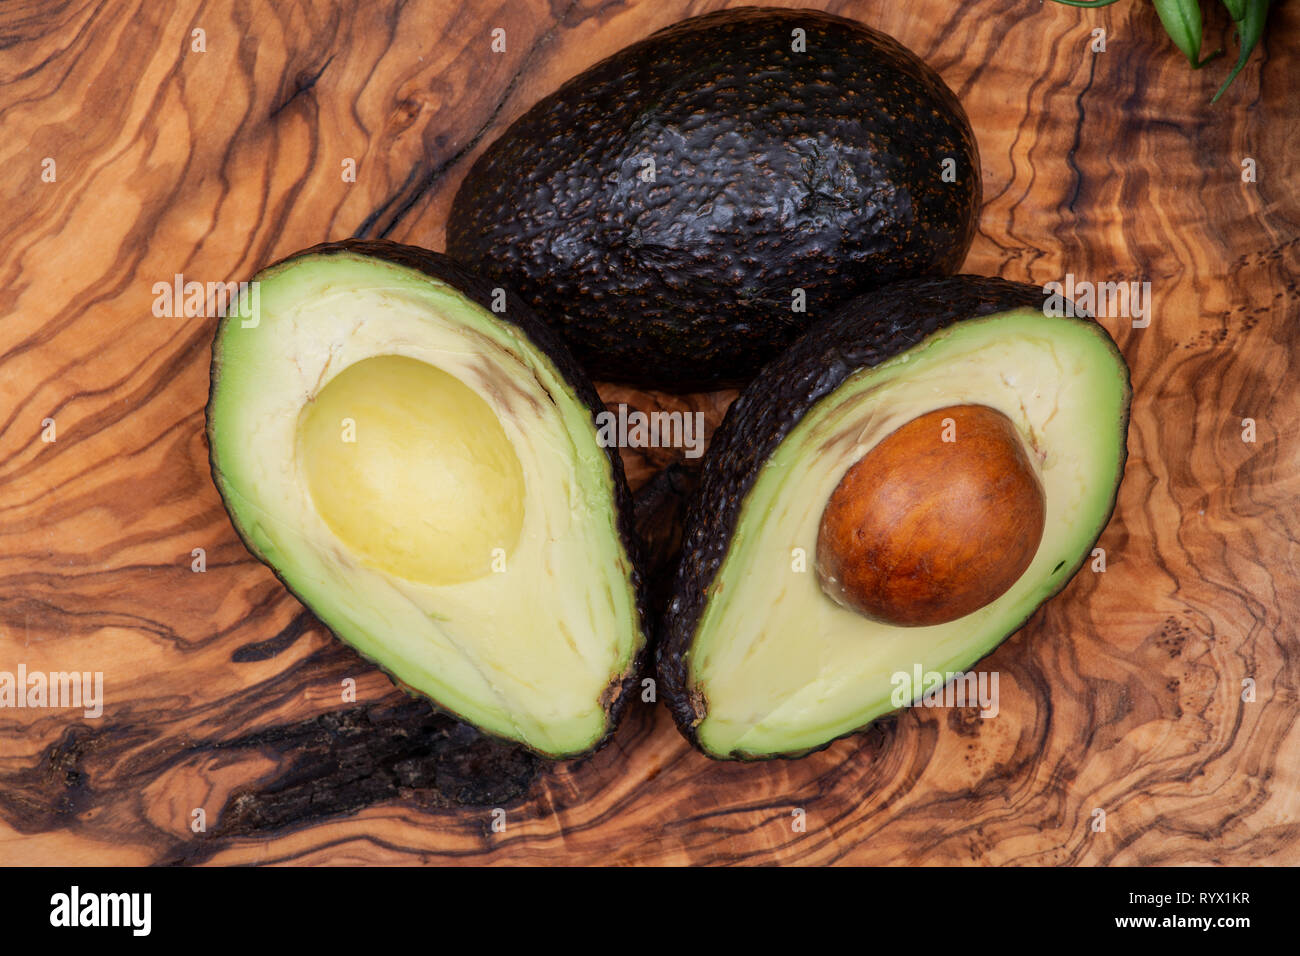 Fresh Organic Avocado cut in half arranged on natural olive wood. Persea americana in the Lauraceae family. Avocado Pear. Alligator Pear. Stock Photo